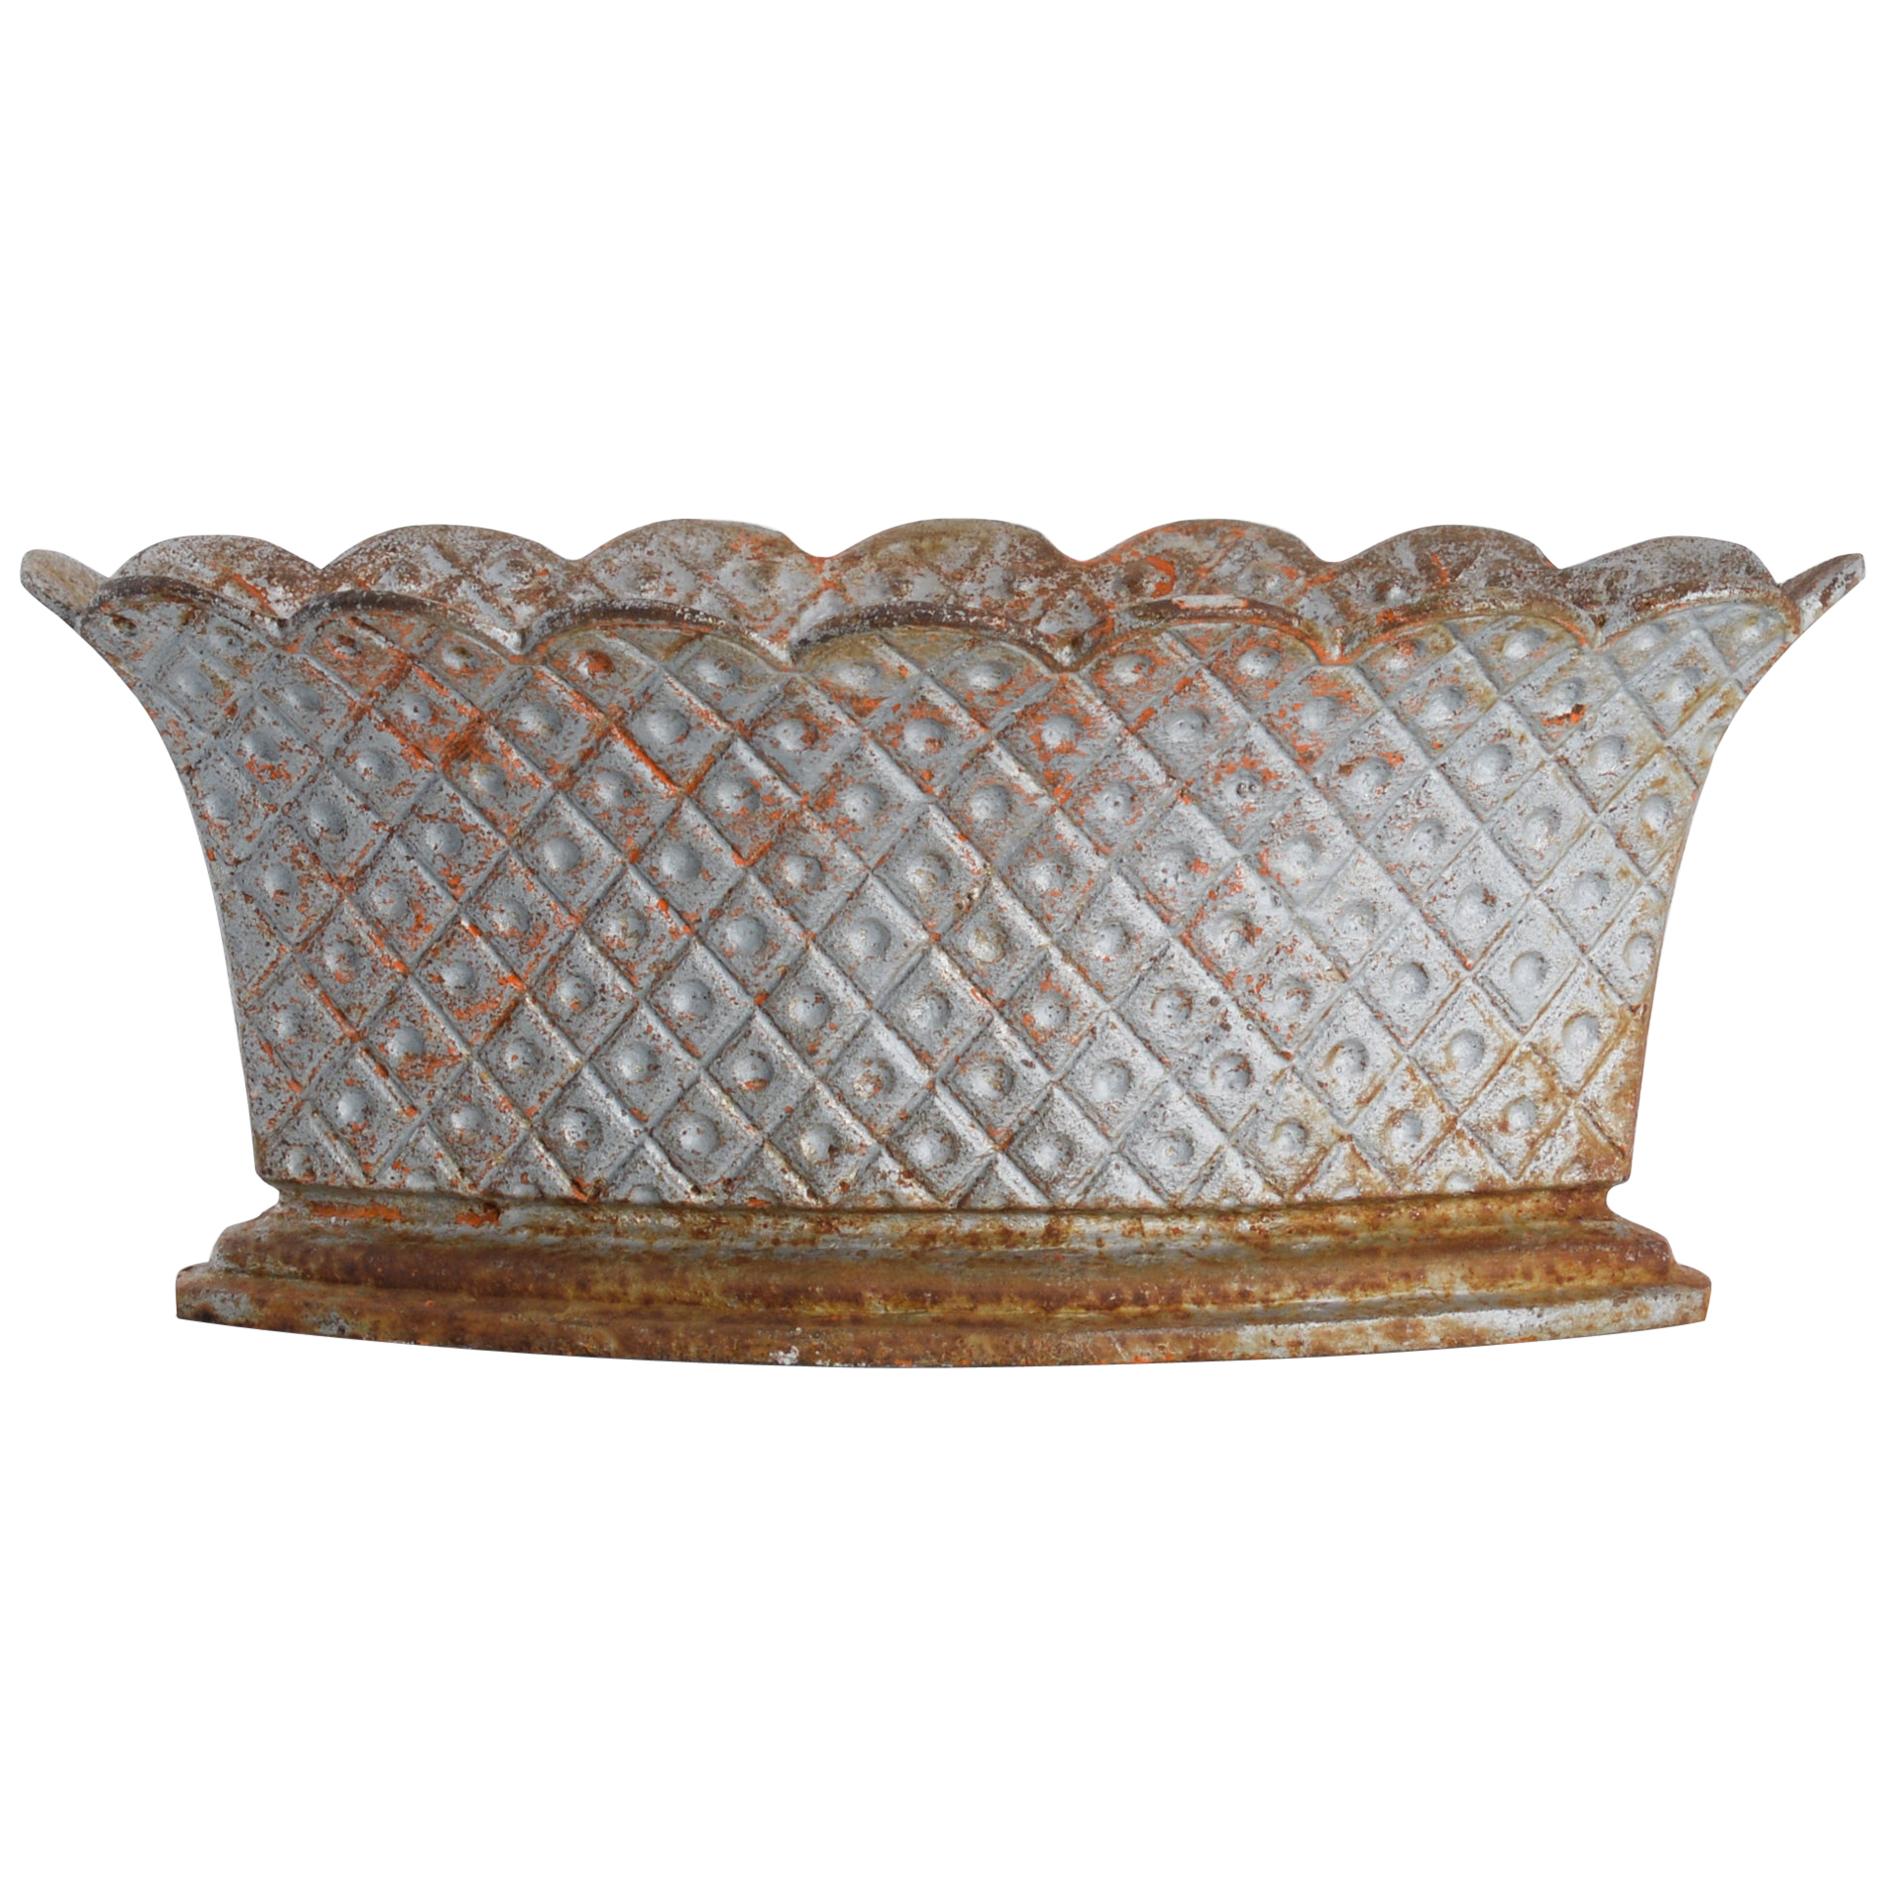 This cast iron planter with a stepped base was made in France, circa 1900. The diamond lattice pattern with circles and a scalloped rim give this planter a charming appearance. The planter has a lovely patina, which will bring character and a rustic